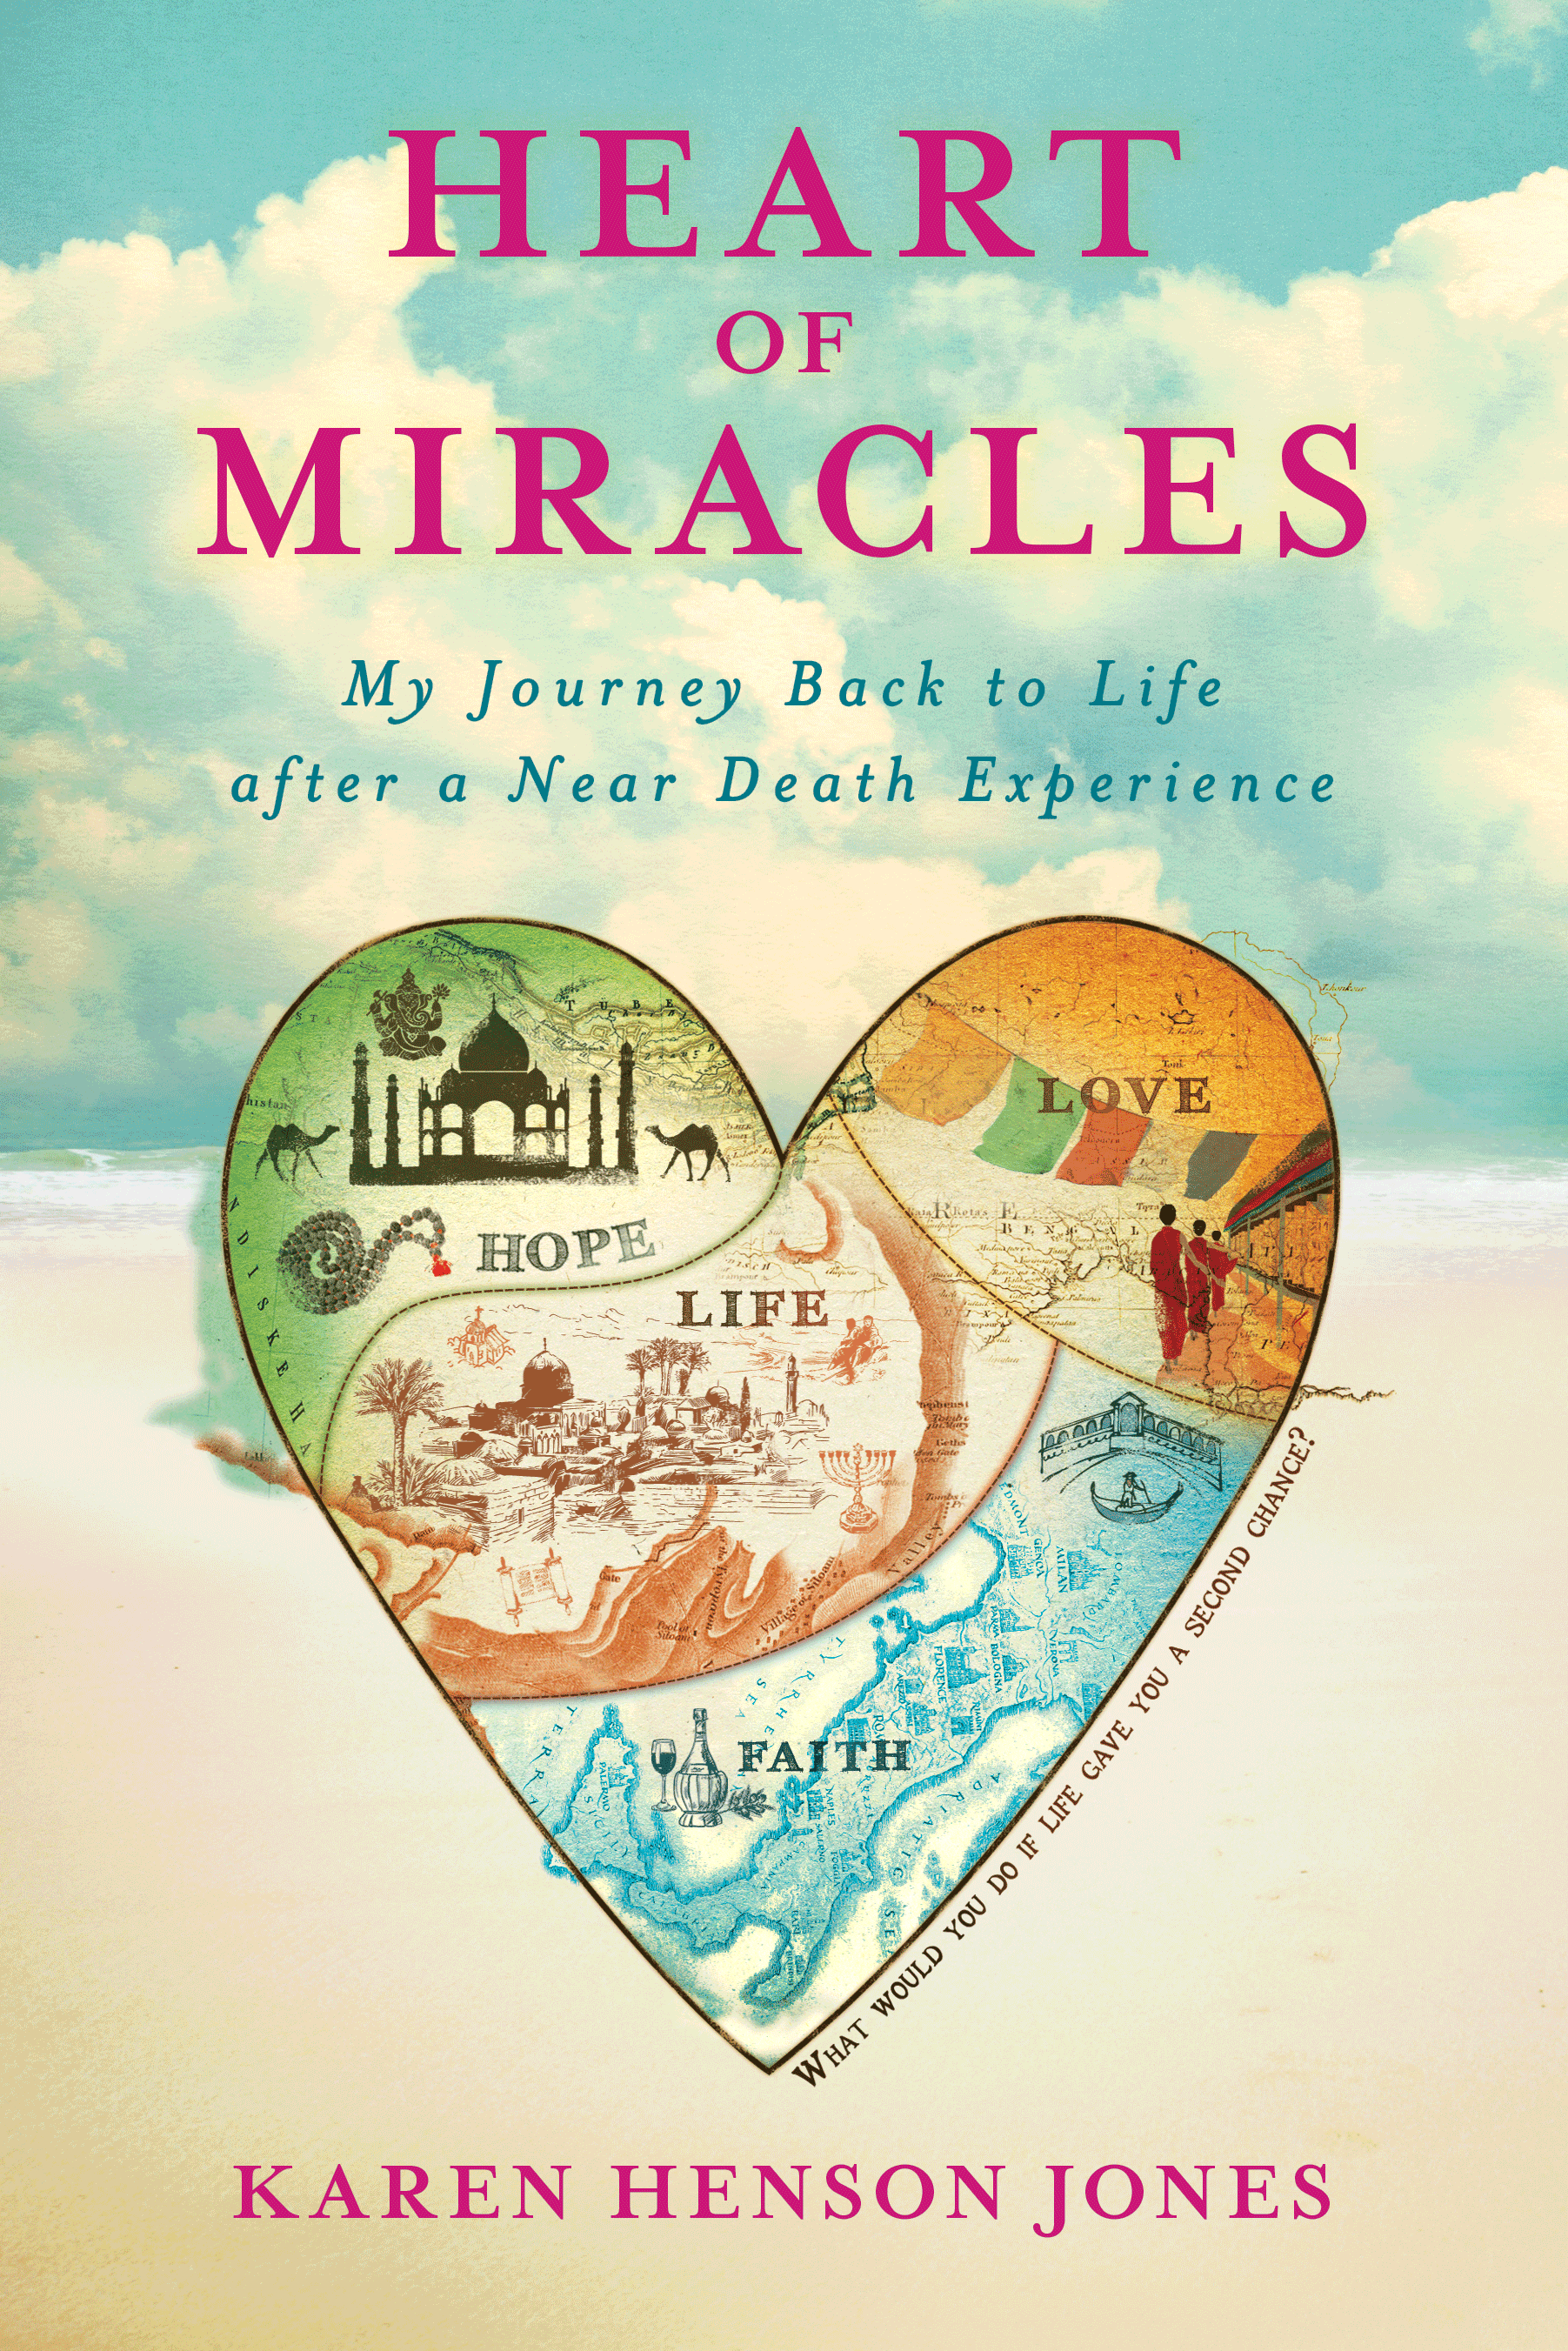 Mir Journey. Henson Island обложка. A Miracle of the Heart book. My Miracle. Back journey